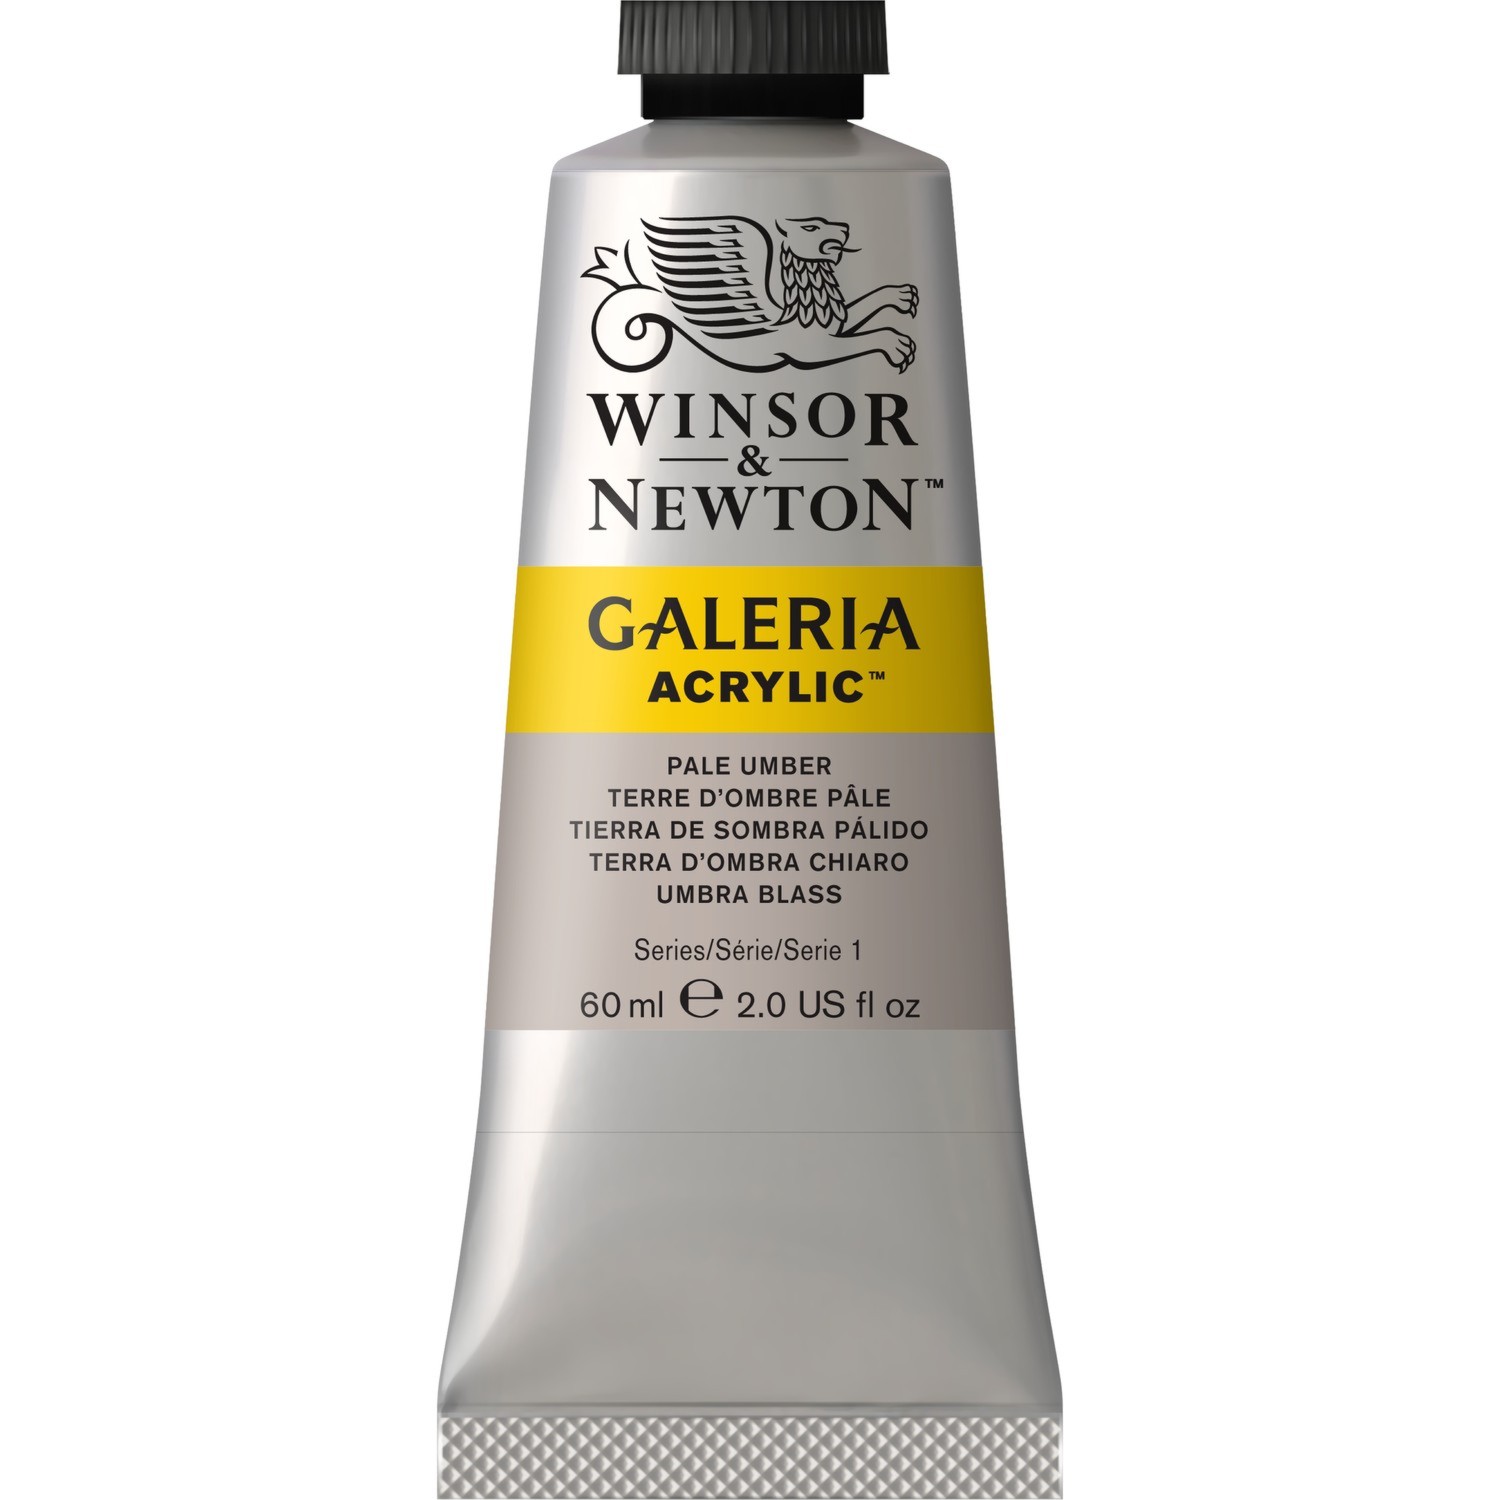 Winsor and Newton 60ml Galeria Acrylic Paint - Pale Umber Image 1